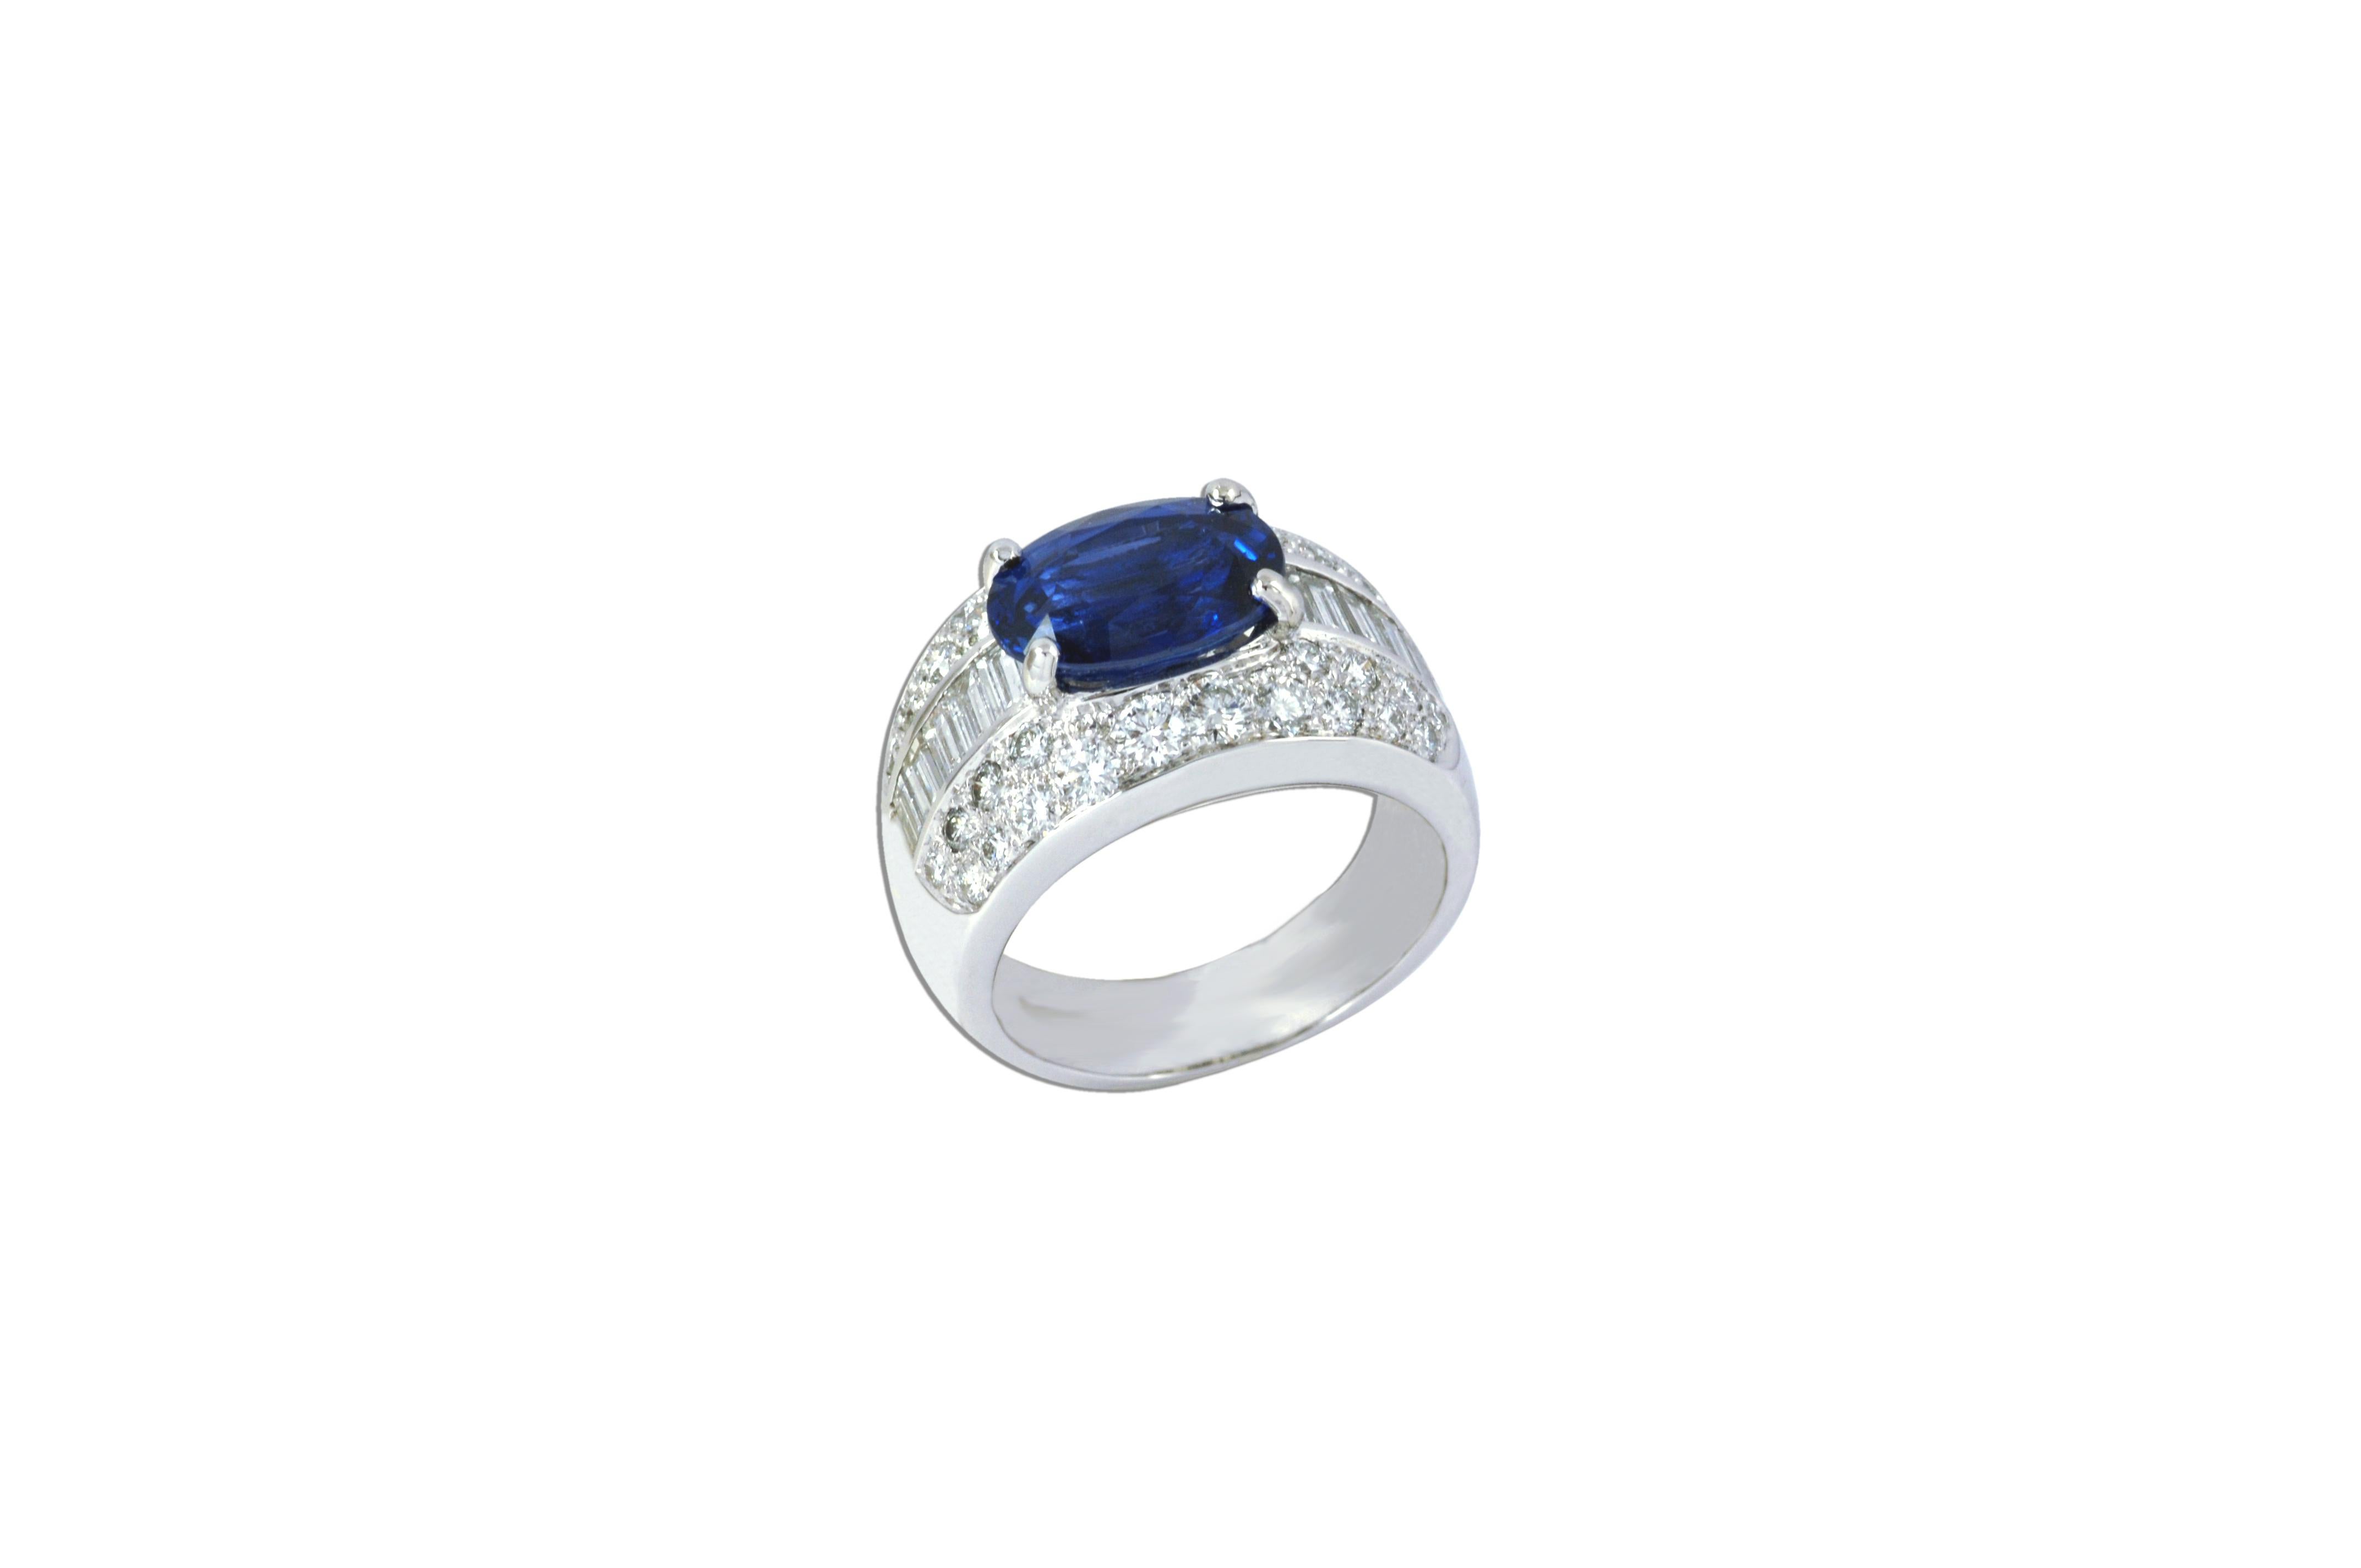 Blue Sapphire 4.34 carats with Diamond 1.94 carats Ring in 18 karat White Gold Settings

Width: 2.5 cm
Length: 1.5 cm
Ring Size: 55


